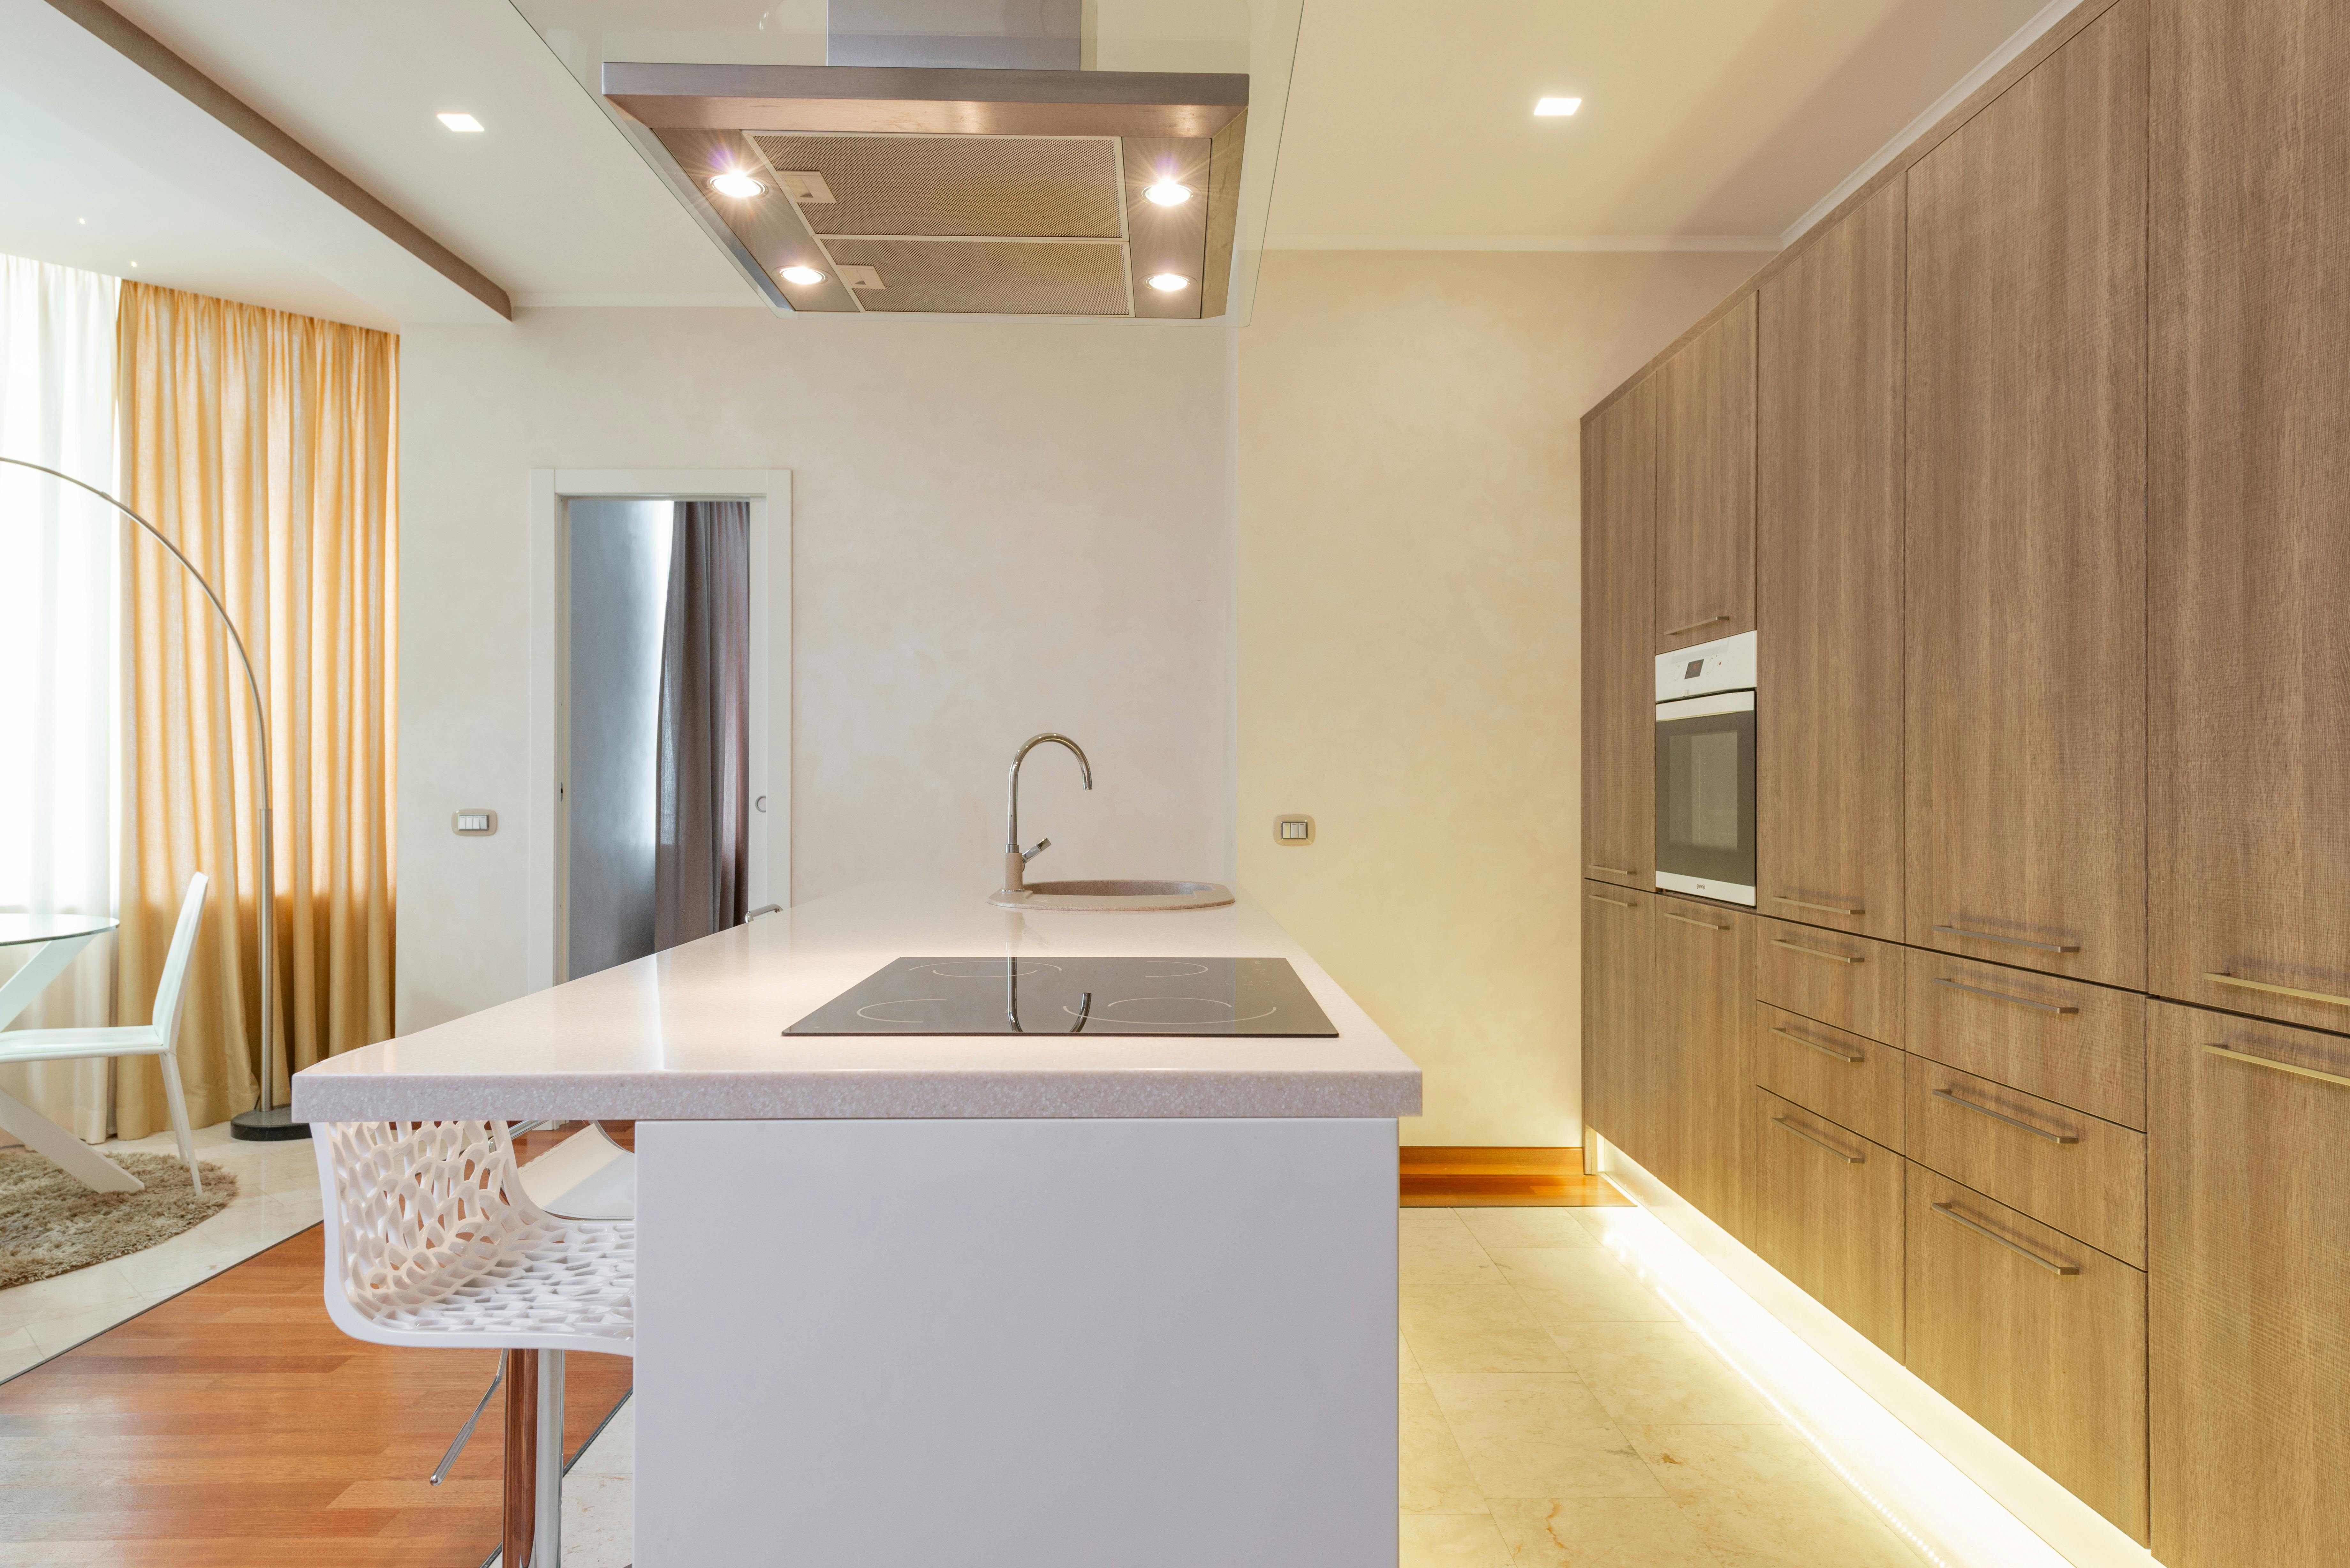 interior of minimalist kitchen with wooden furniture and island